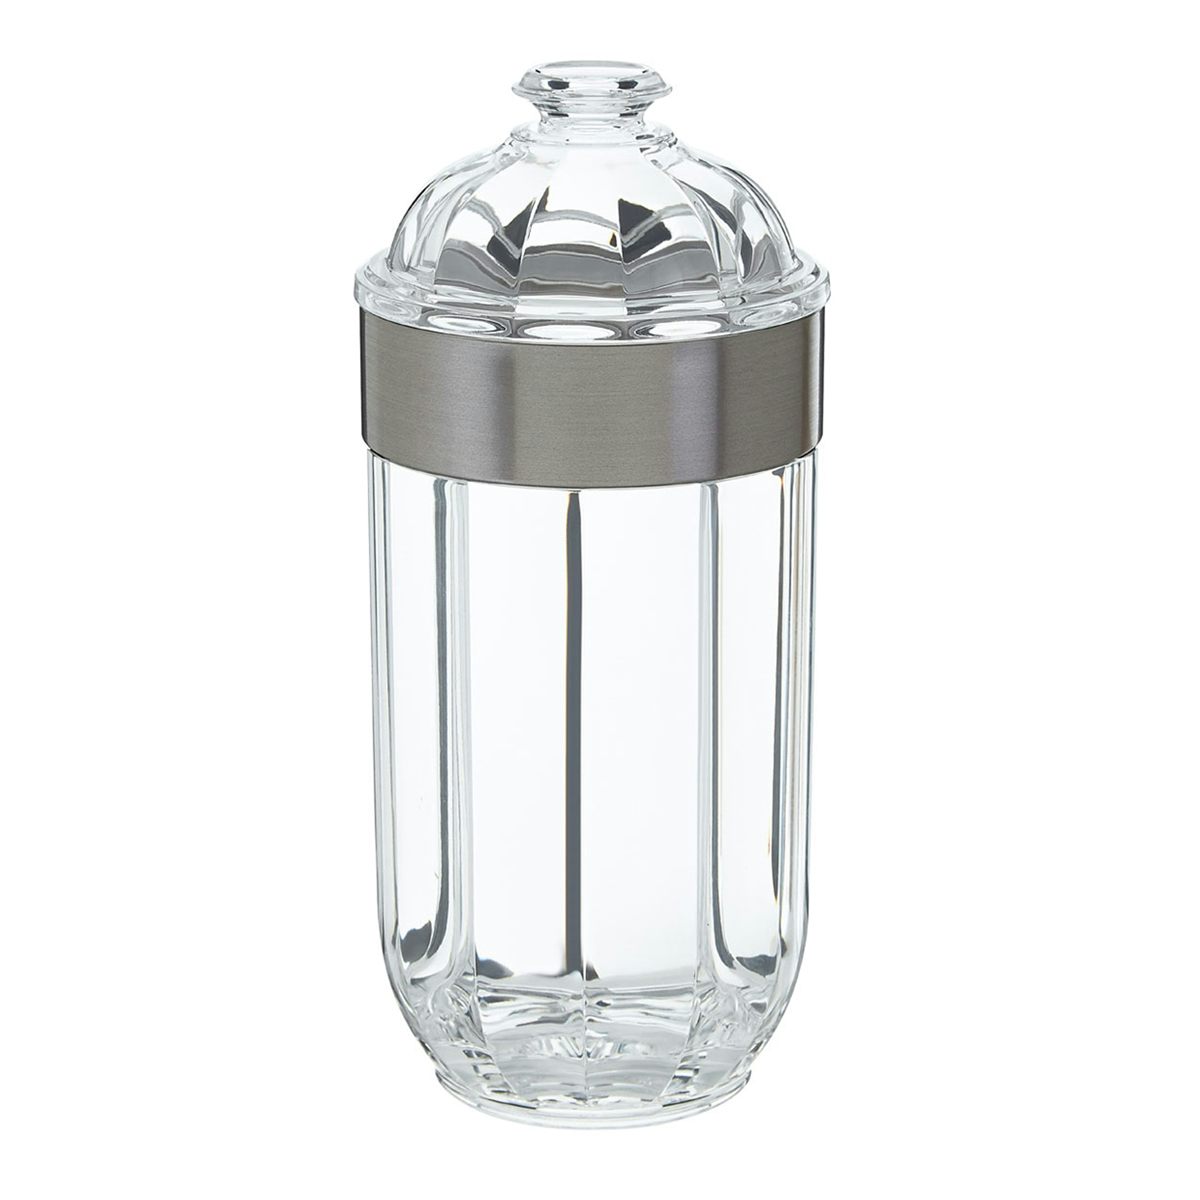 Accents Silver large acrylic storage jar